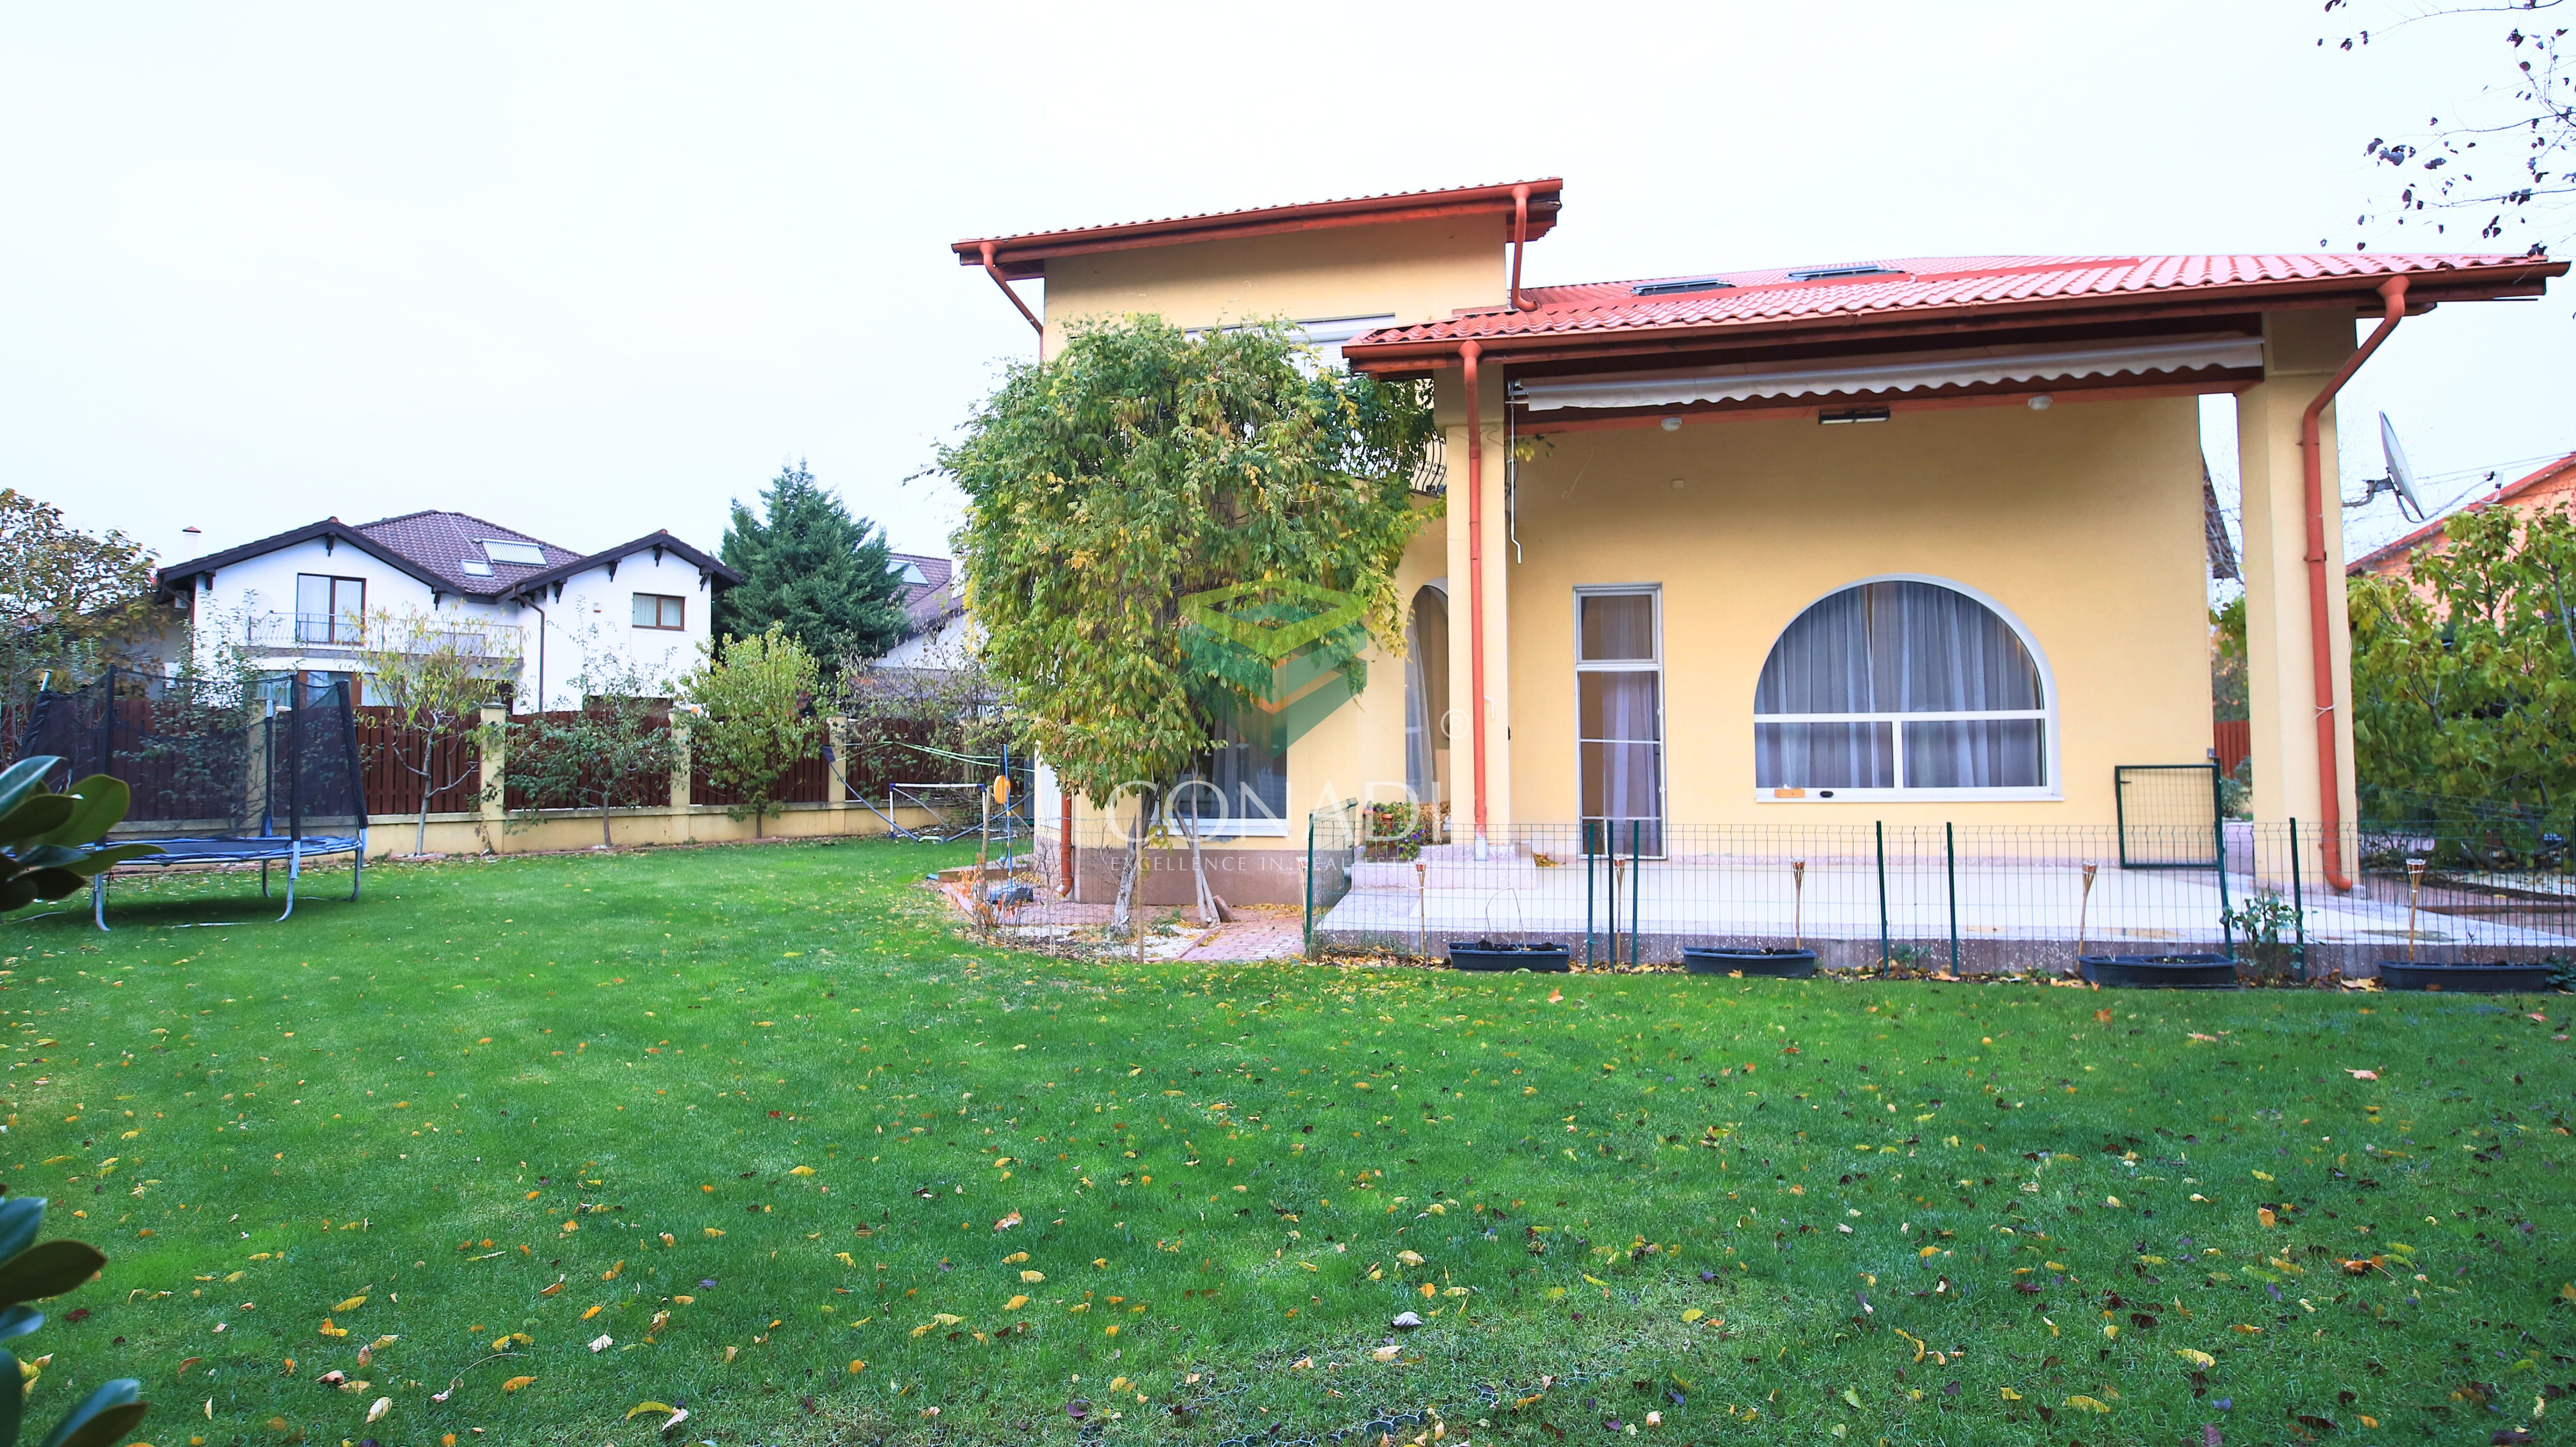 Individual villa | 1000m of land and swimming pool | Near Jolie Ville.